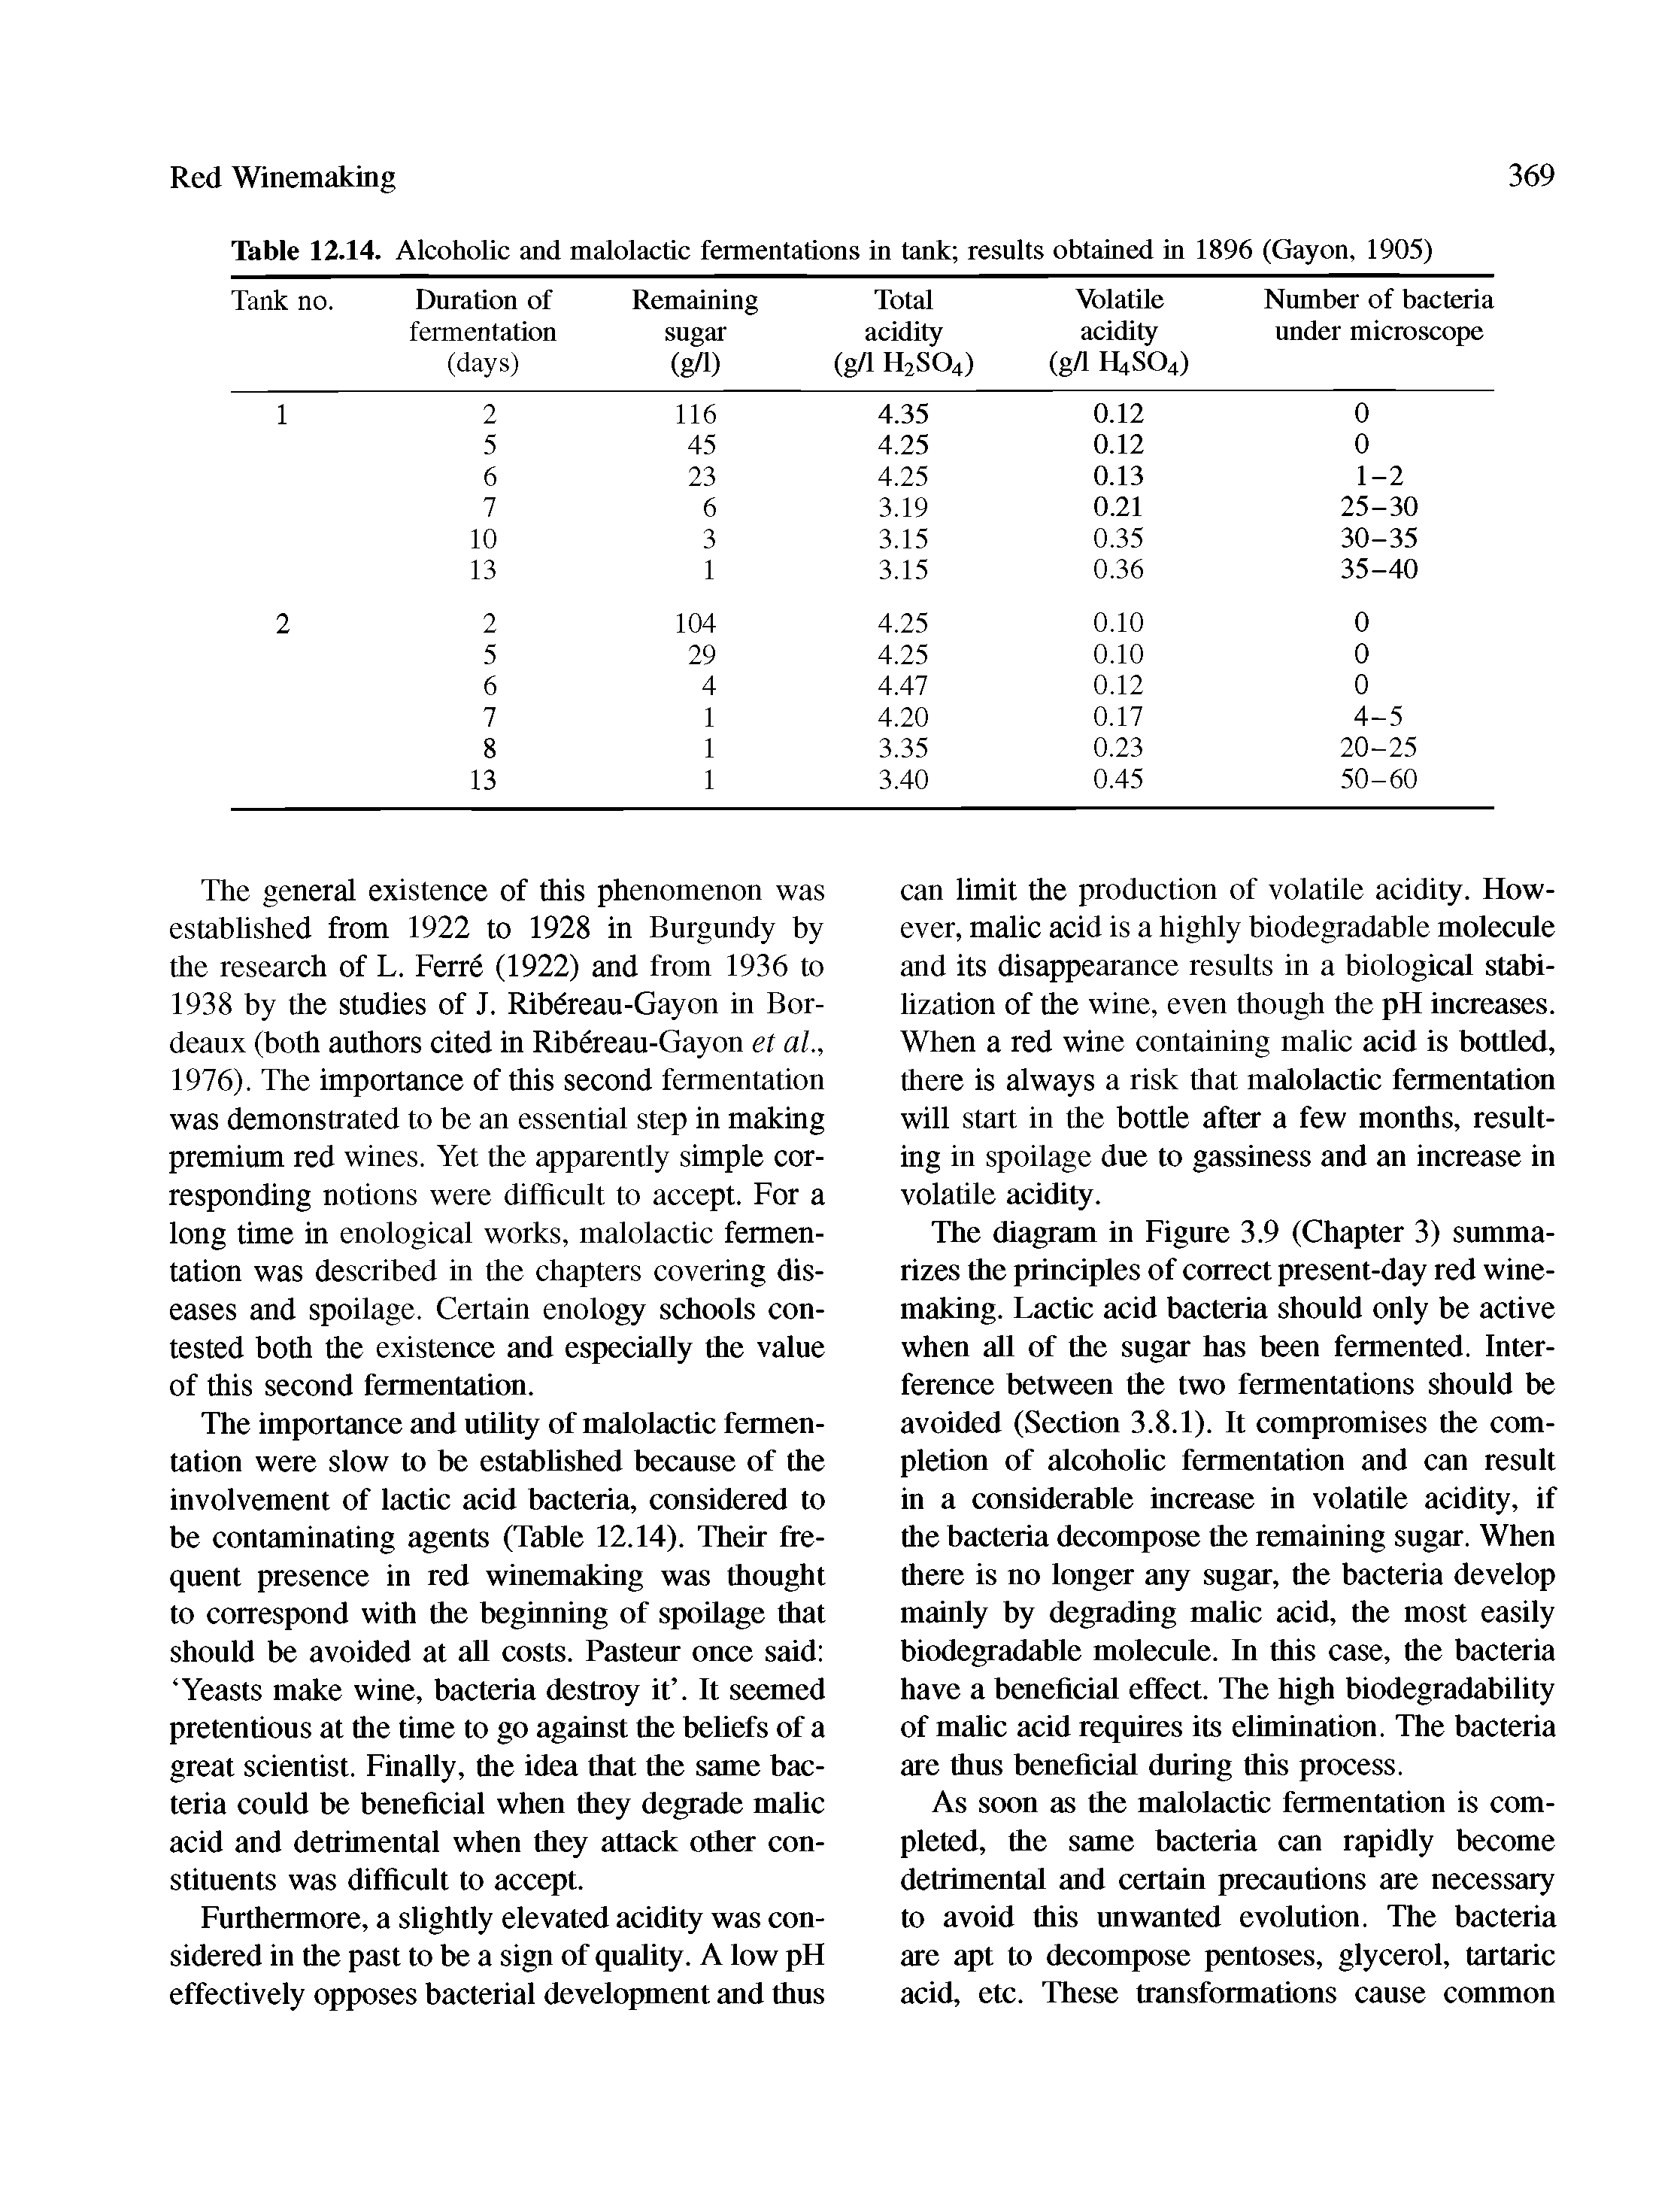 Table 12.14. Alcoholic and malolactic fermentations in tank results obtained in 1896 (Gayon, 1905)...